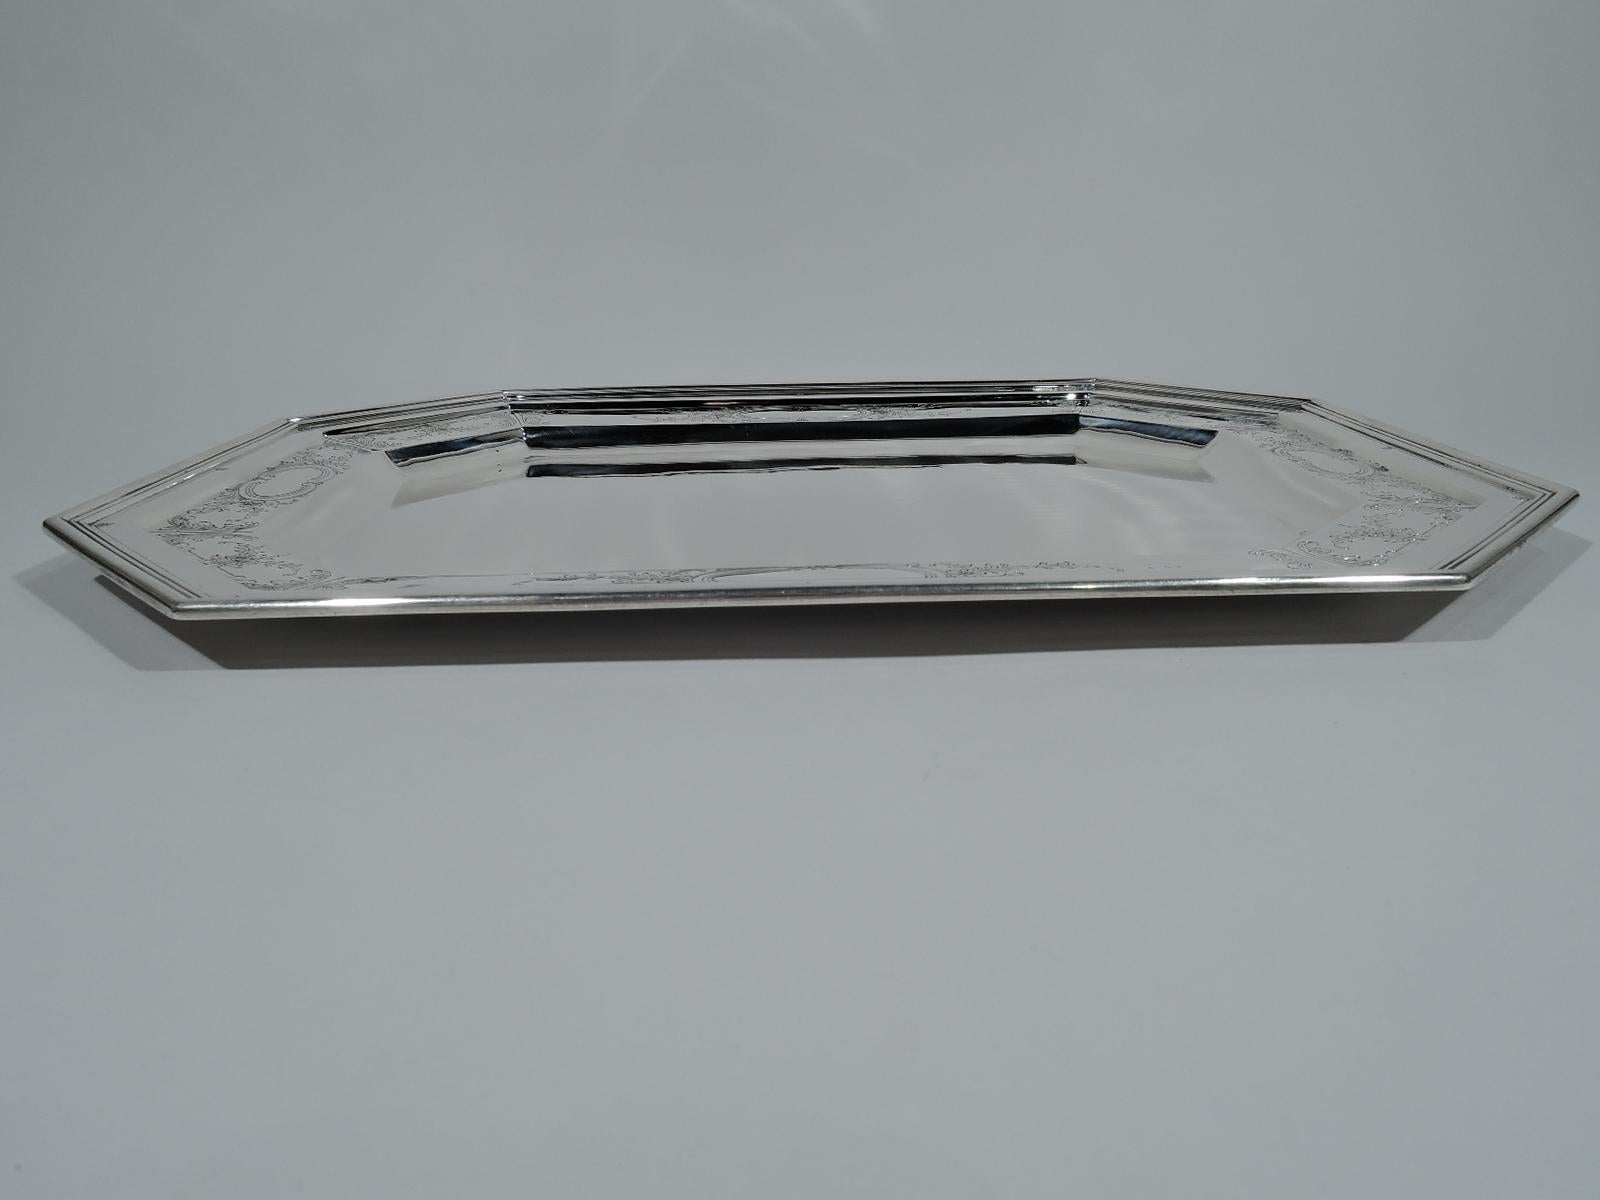 Edwardian sterling silver serving tray. Made by Durgin (part of Gorham), circa 1910. Rectangular with chamfered corners and reeded rim. Engraved leaf-and-scroll border with scrolled frames (vacant). Fully marked including Durgin and Gorham stamps